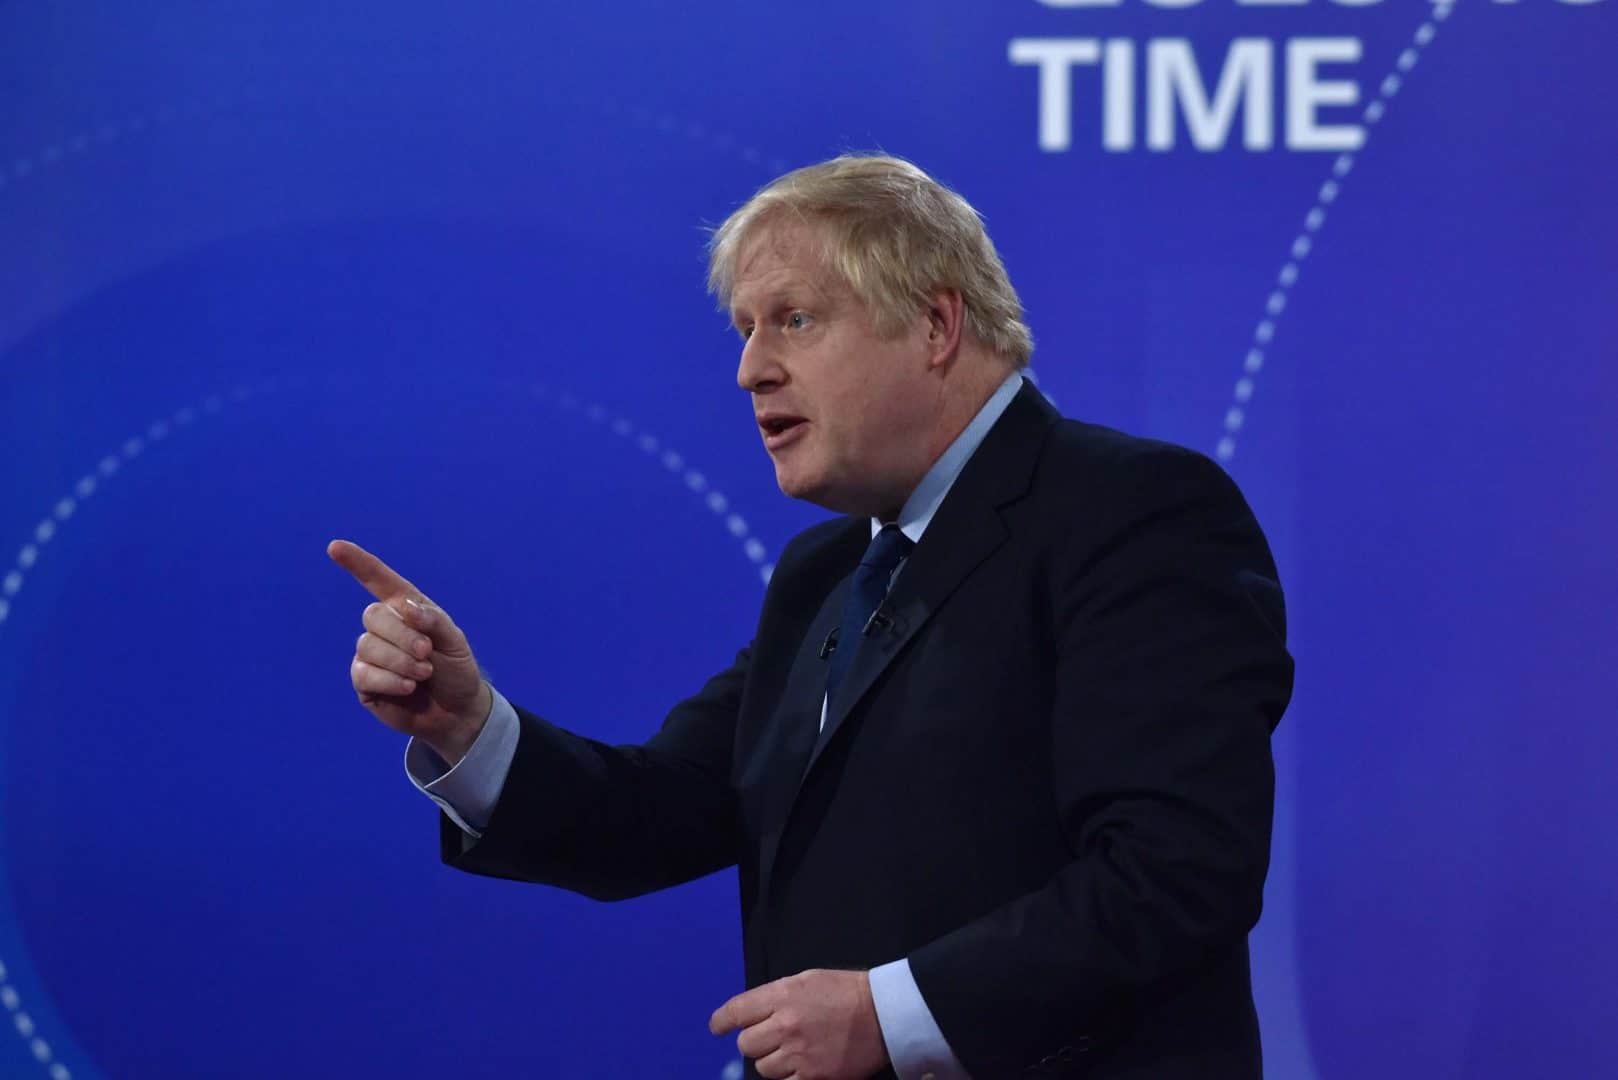 Channel 4 threatens to ’empty-chair’ Boris Johnson during climate change debate